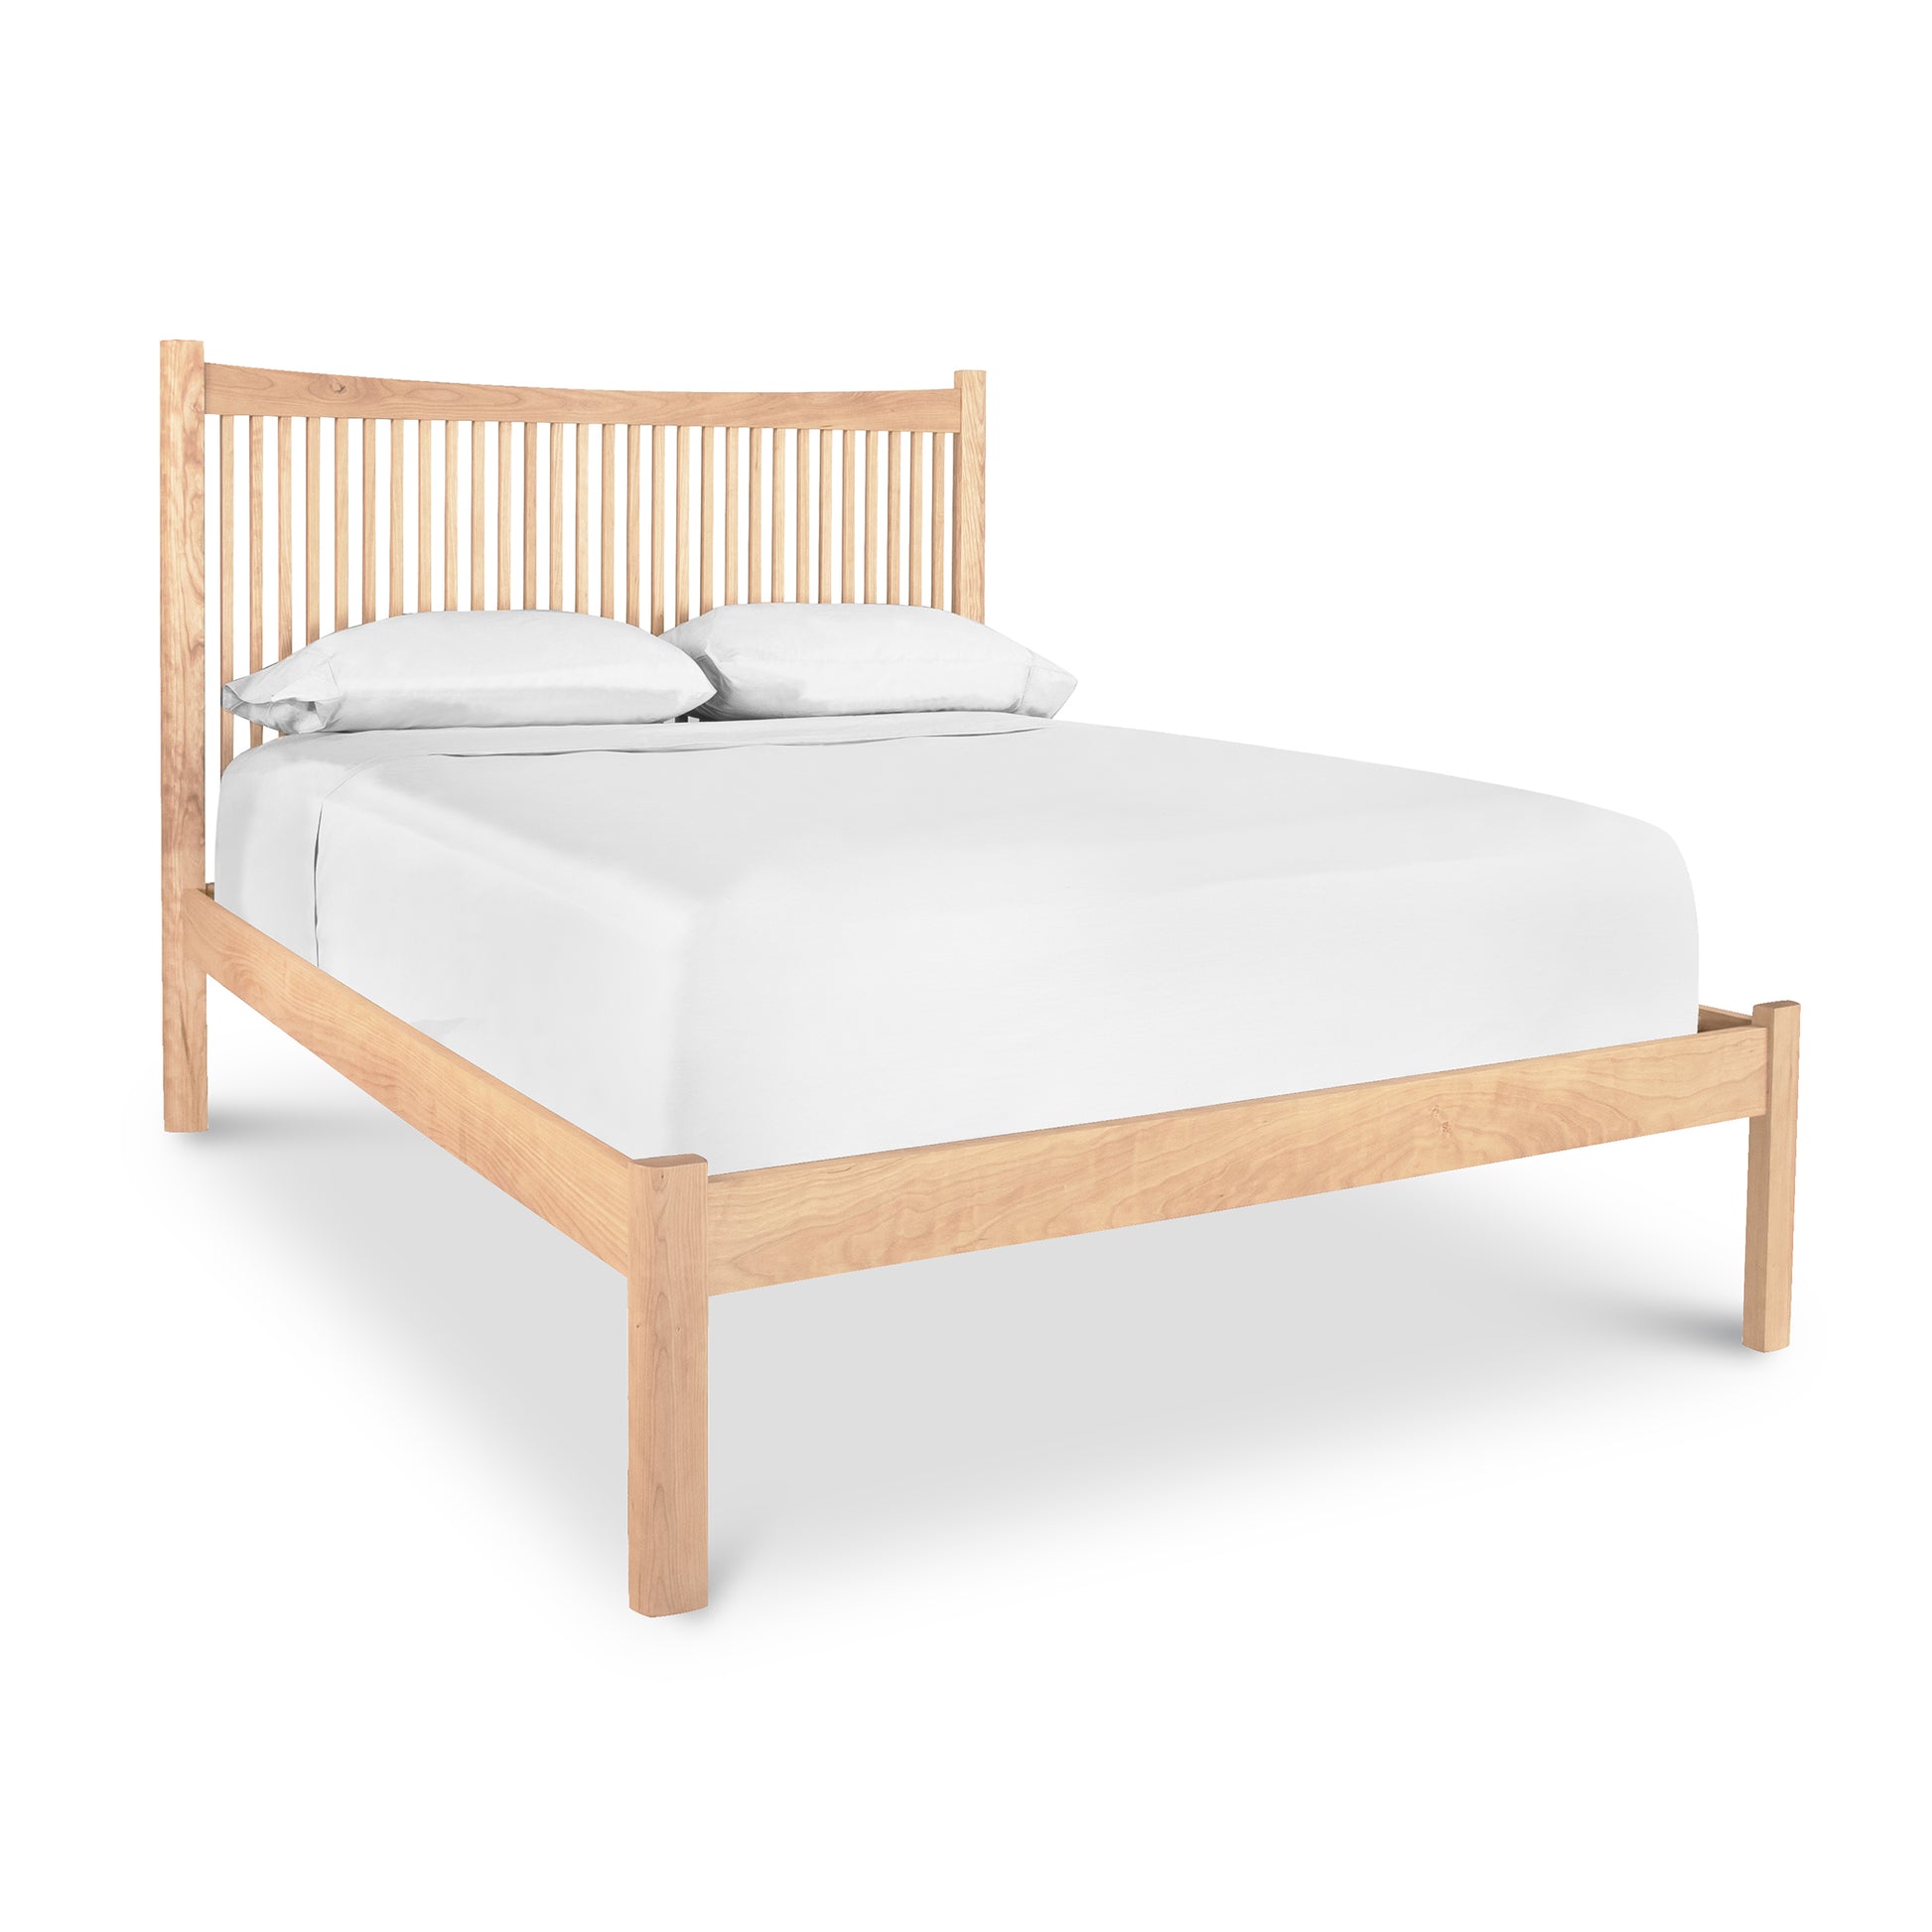 A Vermont Furniture Designs Heartwood Shaker Low Footboard Bed with an eco-friendly oil finish, a white mattress, and two white pillows against a white background.